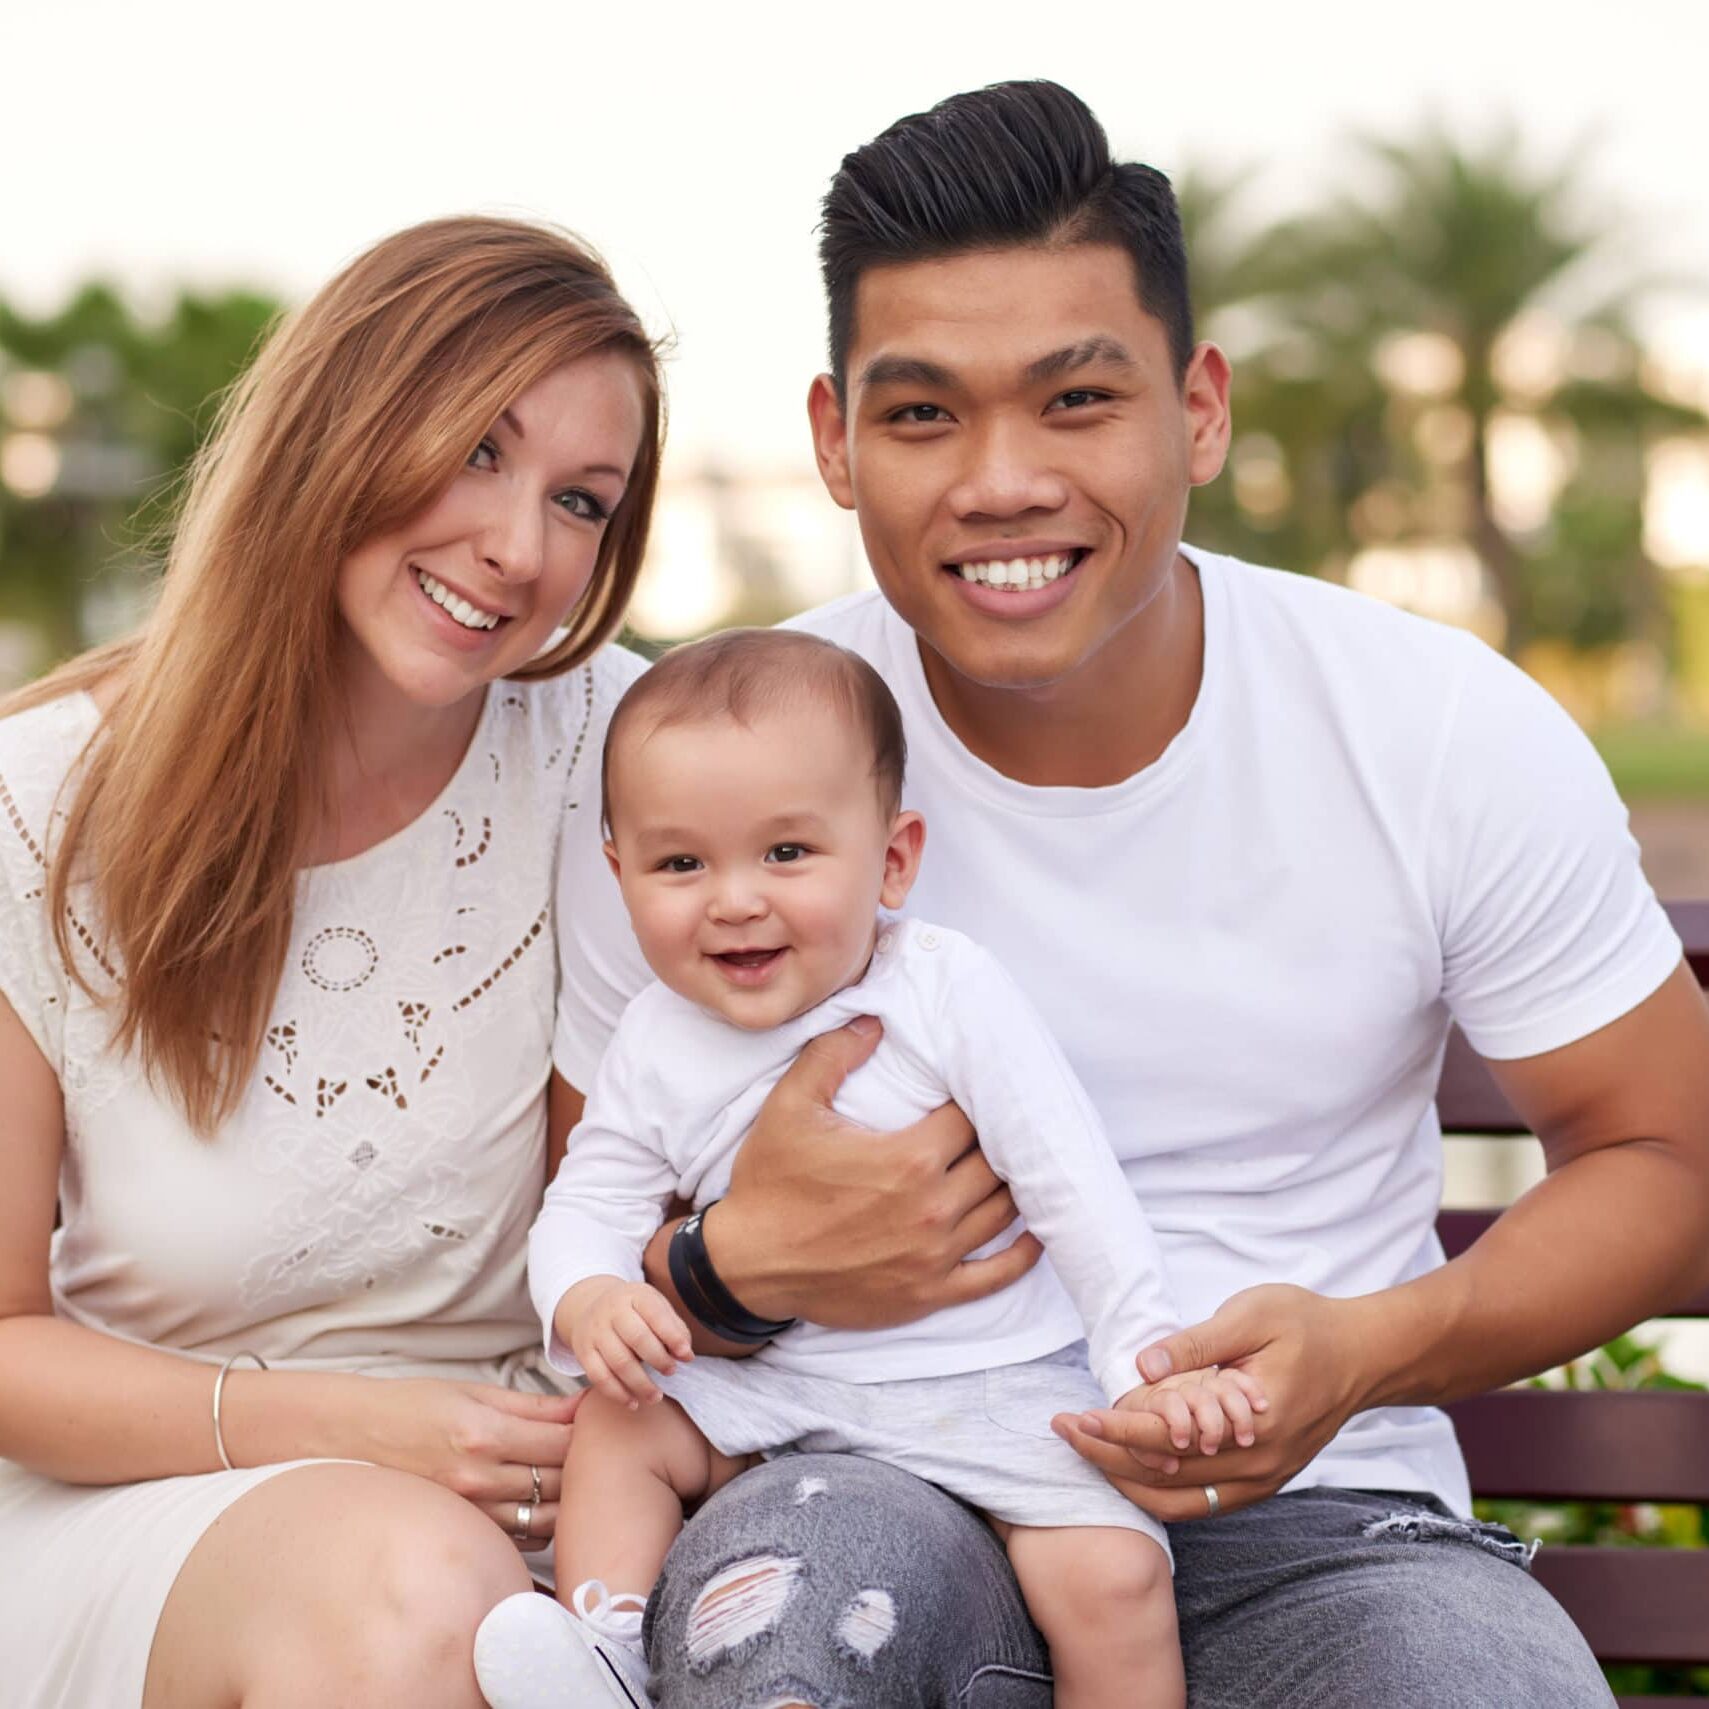 Cheerful smiling multi-ethnic family with baby boy sitting on bench